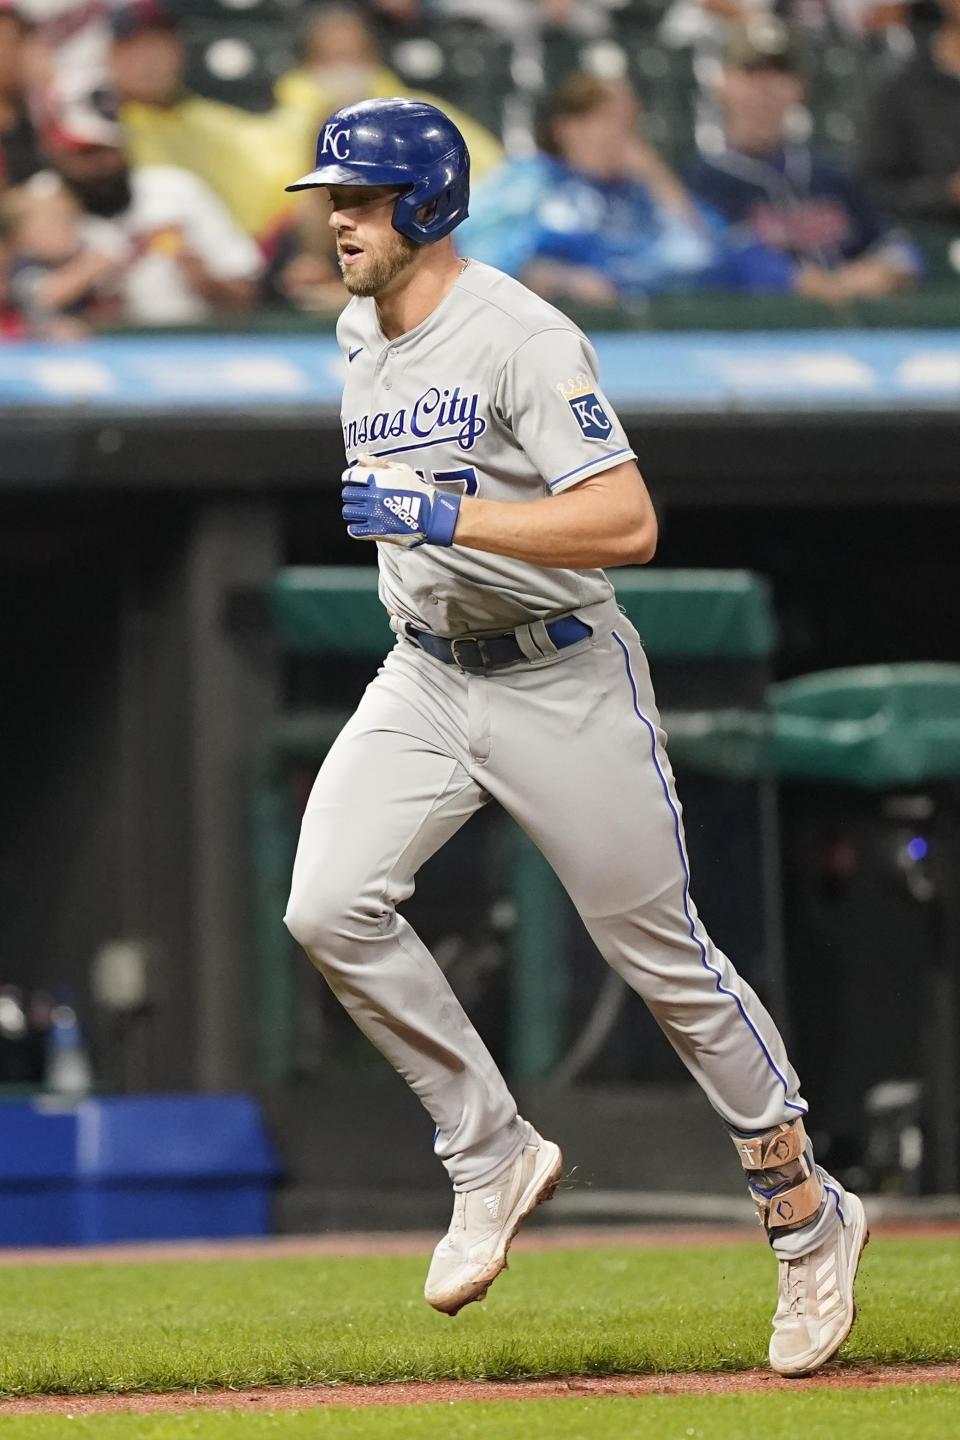 Kansas City Royals' Hunter Dozier runs the bases after hitting a solo home run in the seventh inning of a baseball game against the Cleveland Indians, Tuesday, Sept. 21, 2021, in Cleveland. (AP Photo/Tony Dejak)